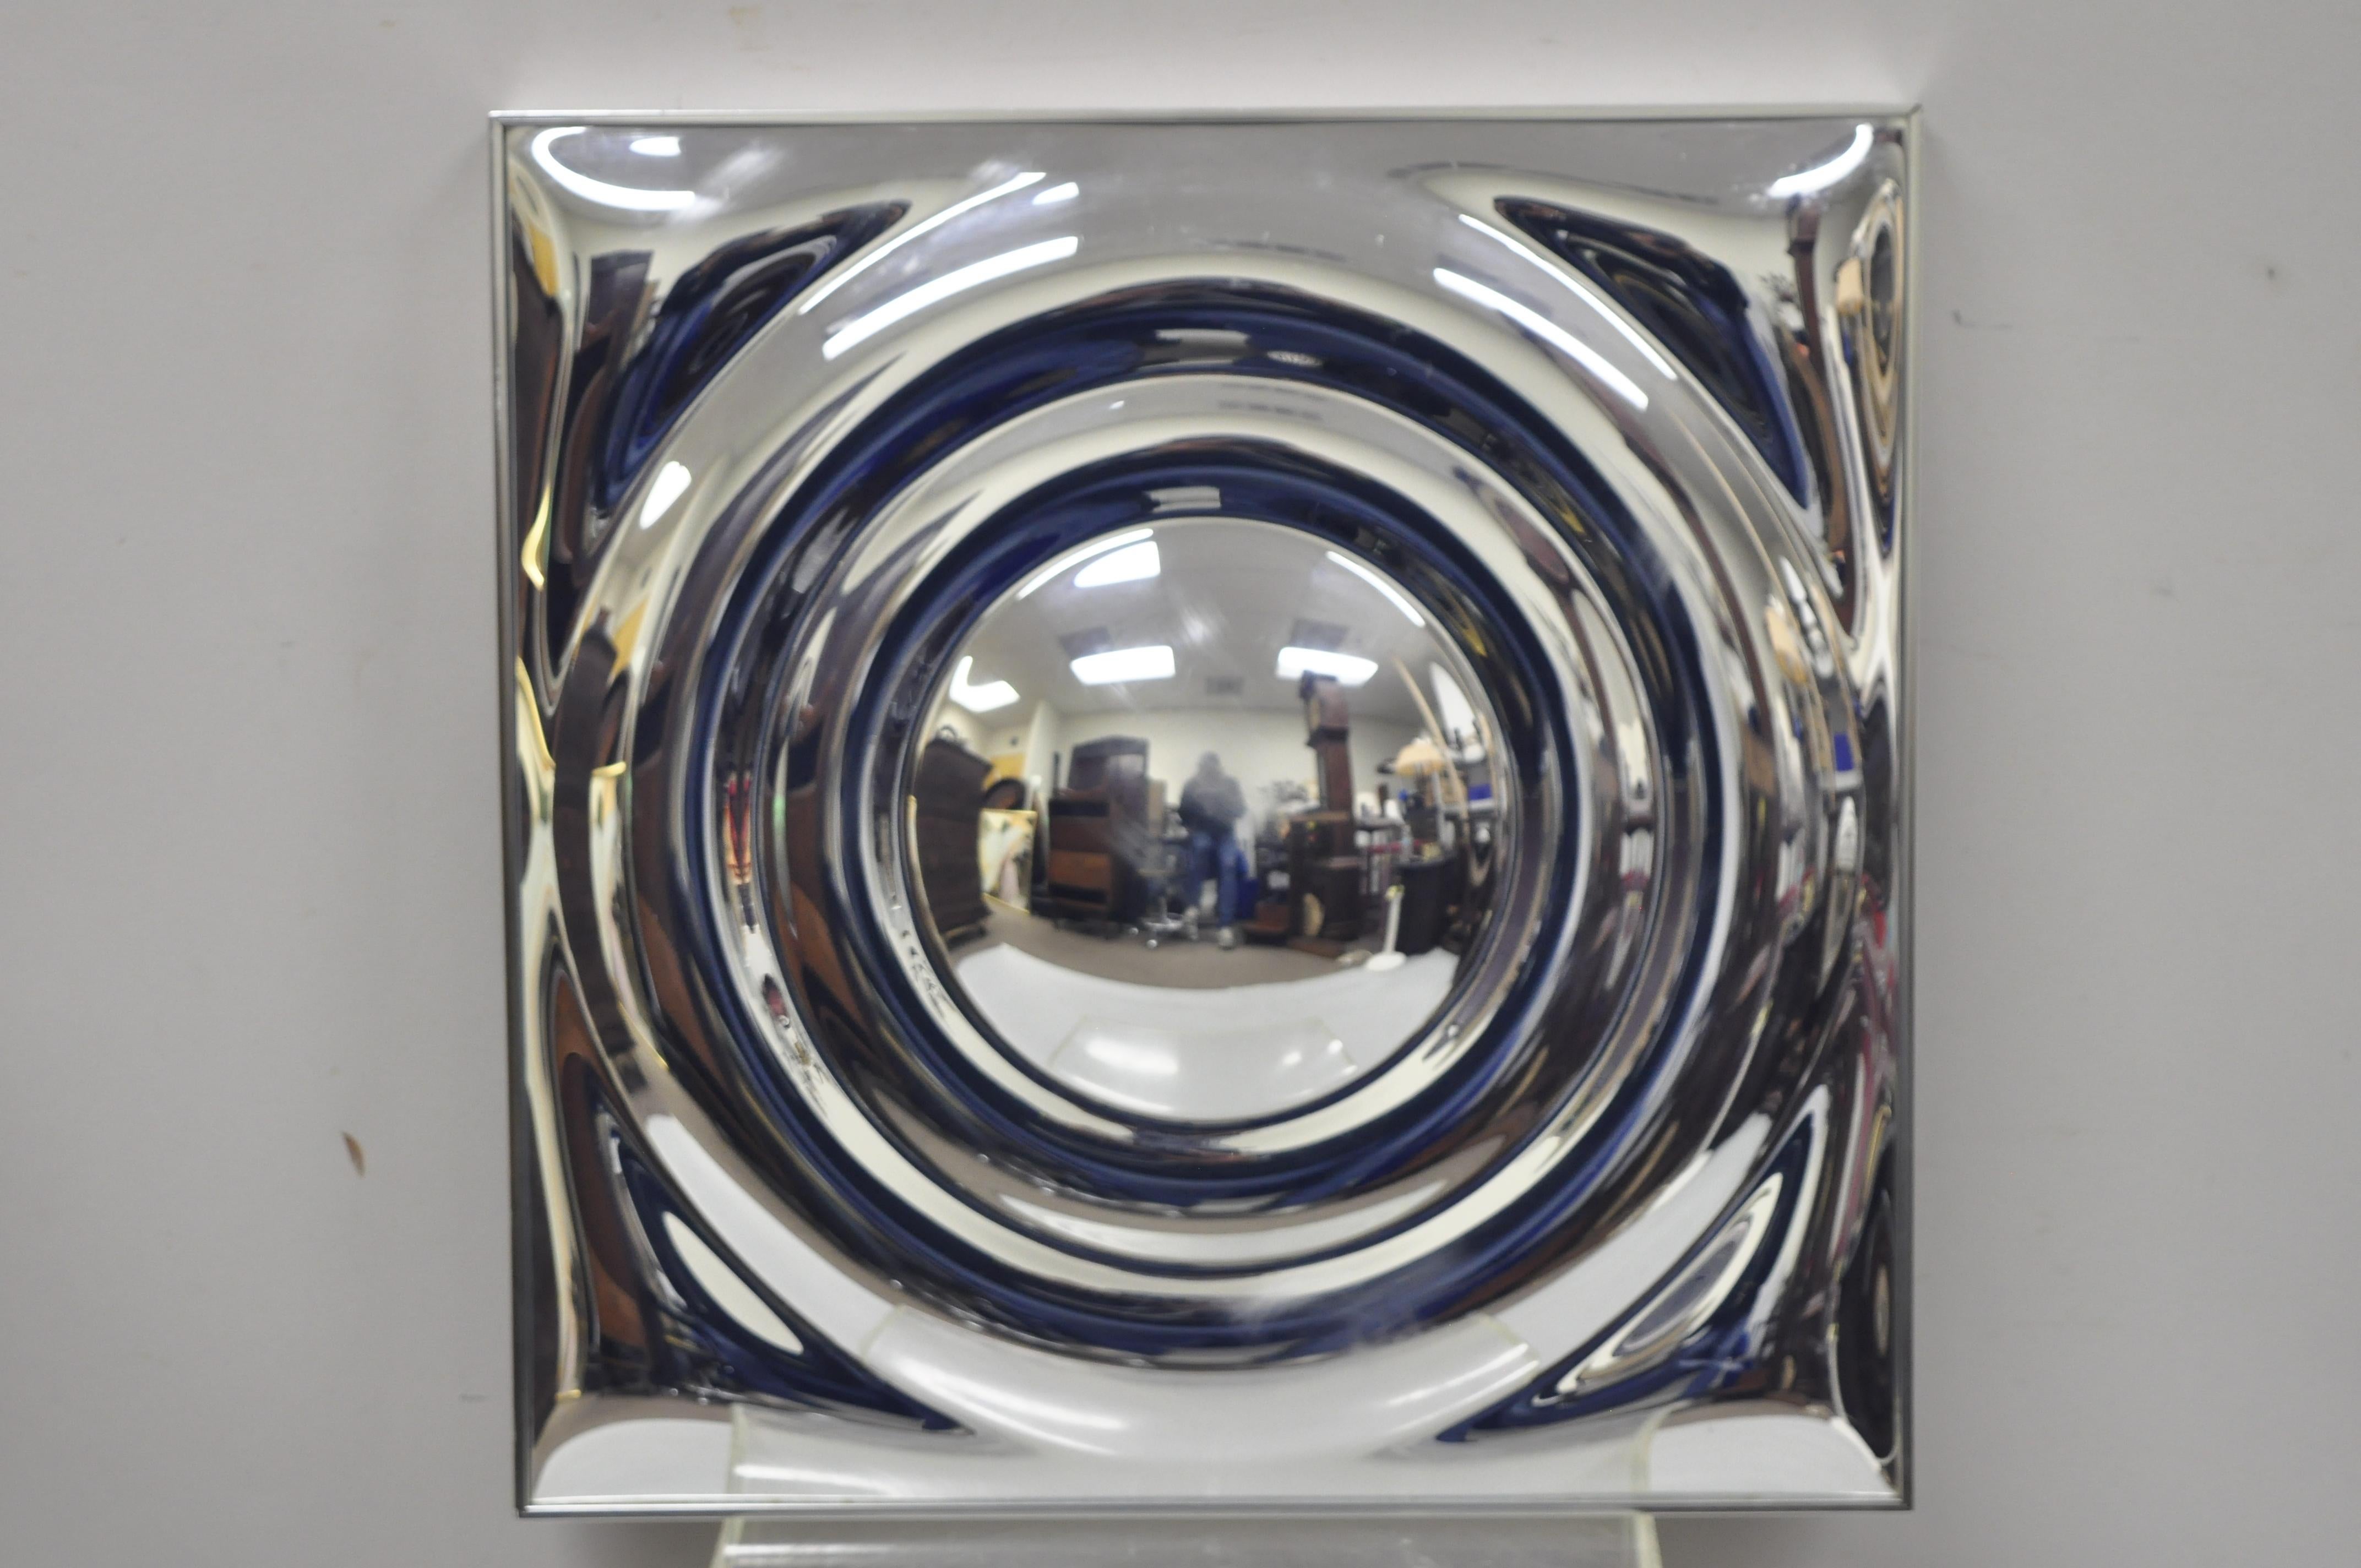 Turner Op Art Saturn ring space age square Mid-Century Modern wall mirror. Item includes rare 